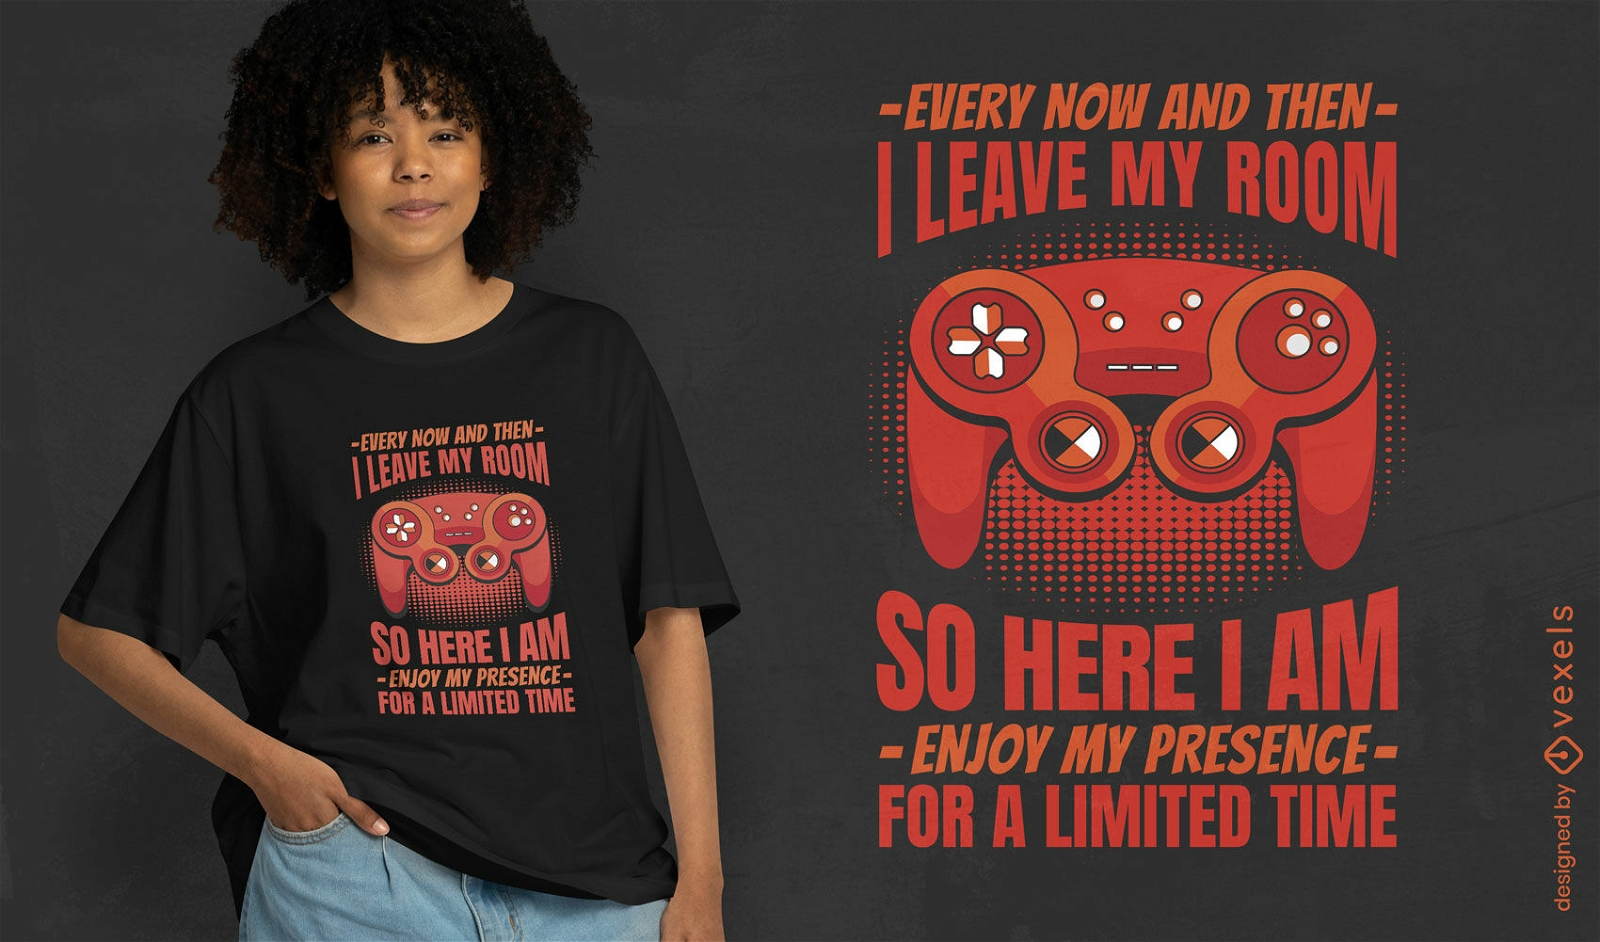 Game controller funny quote t-shirt design